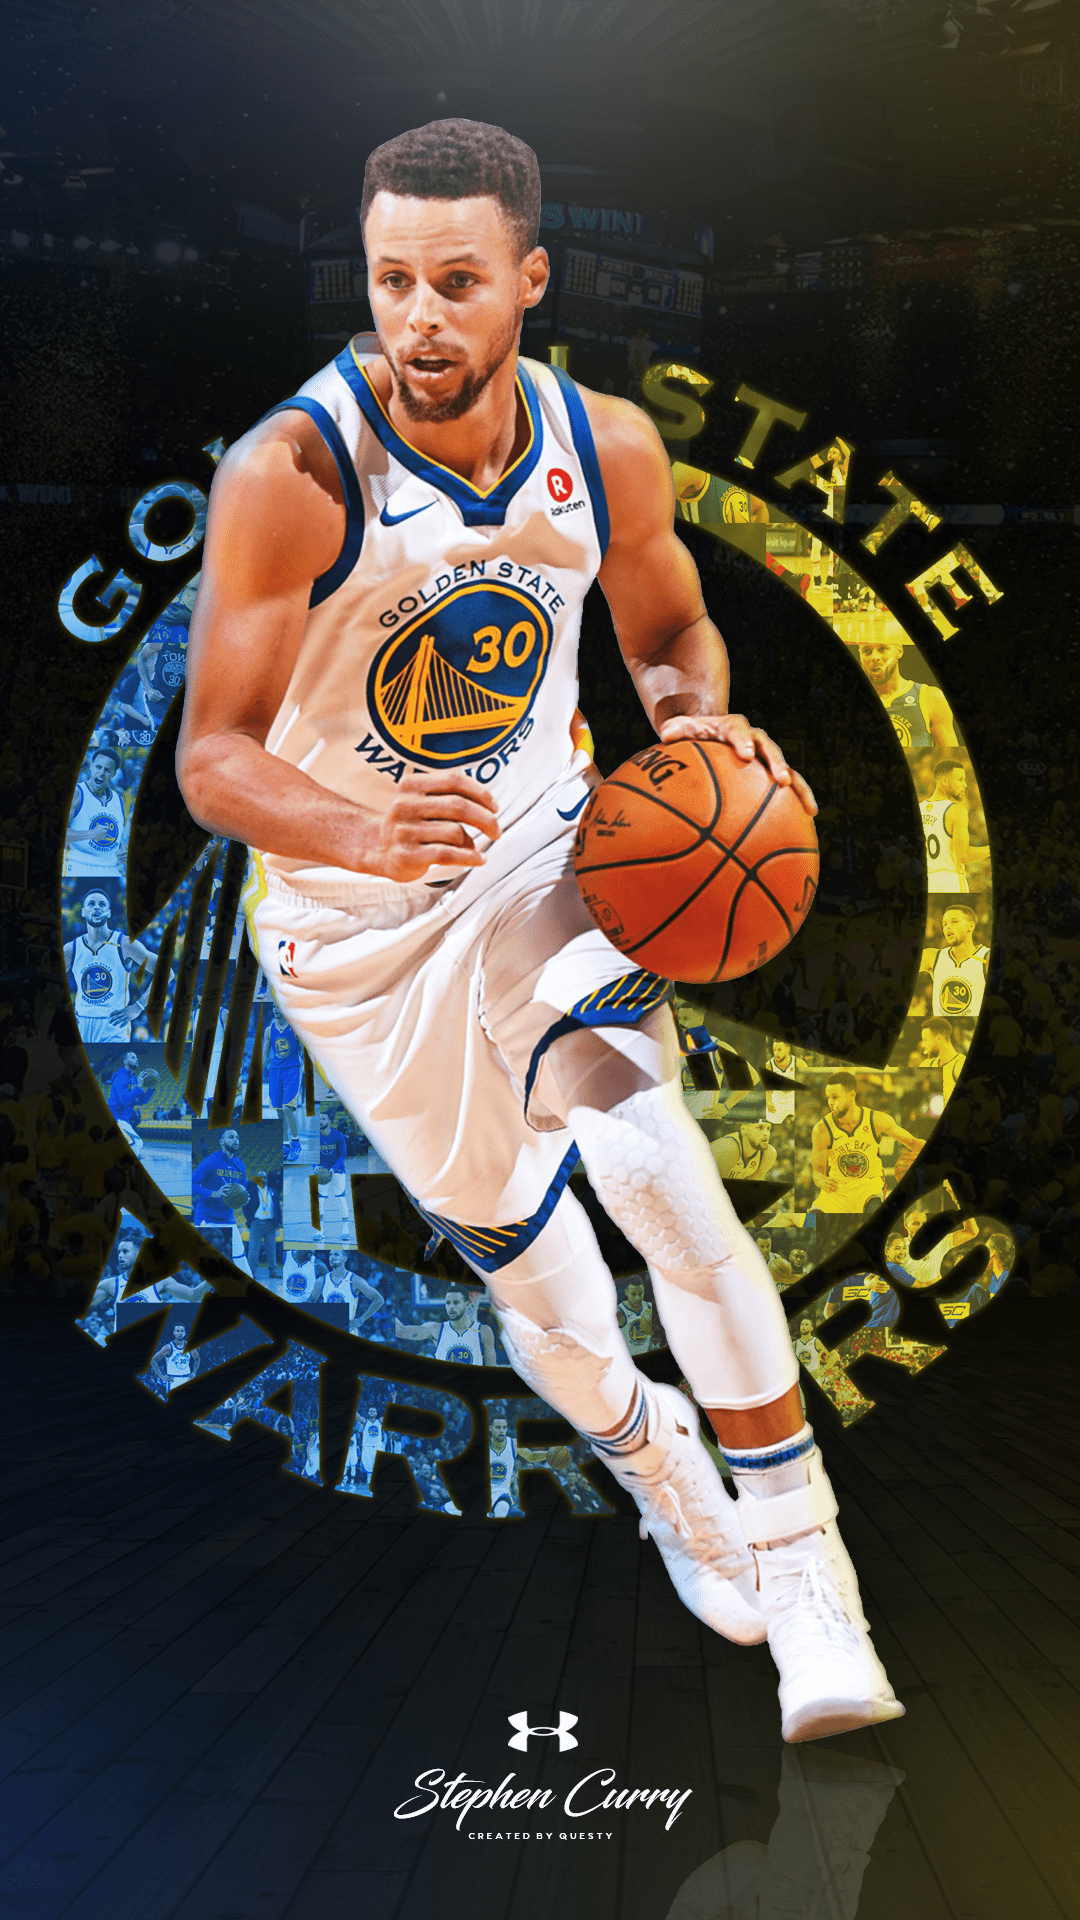 Steph Curry Background Wallpaper - NawPic